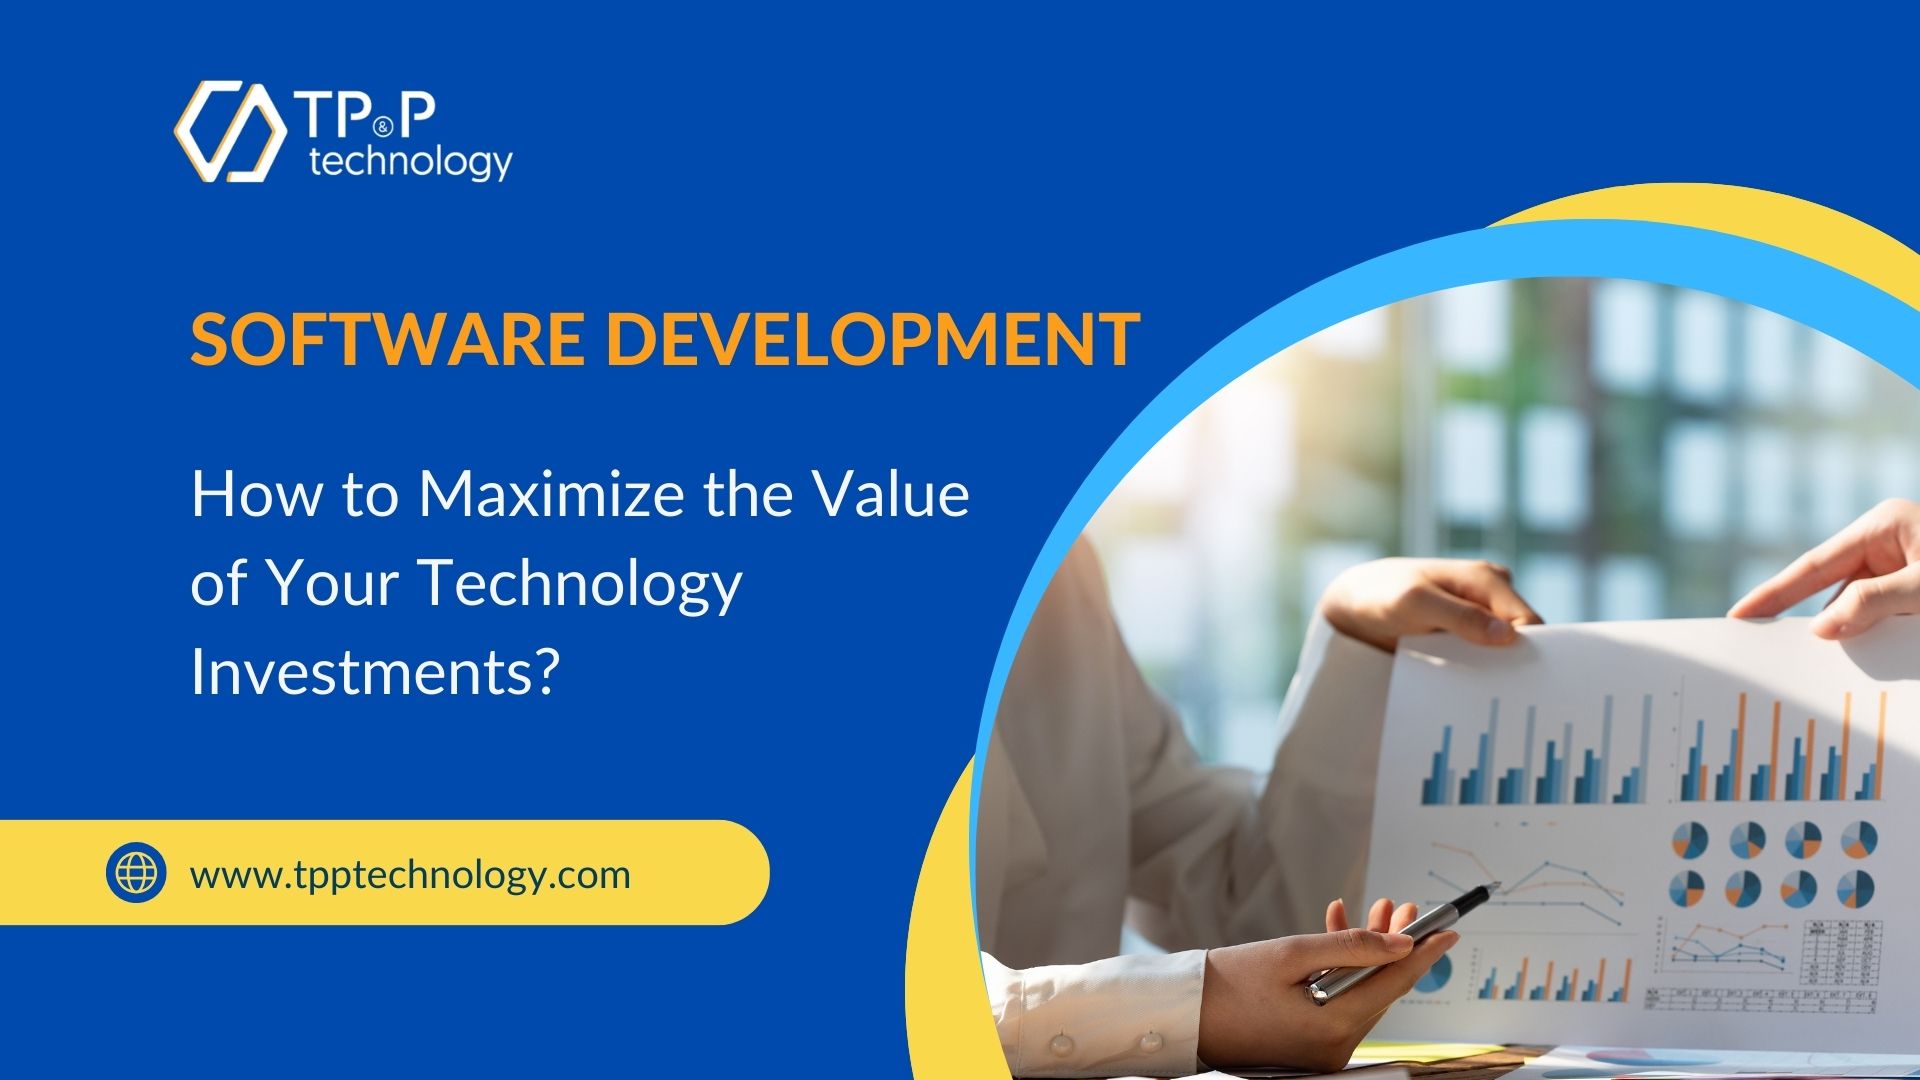 Software Development: How to Maximize the Value of Your Technology Investments?